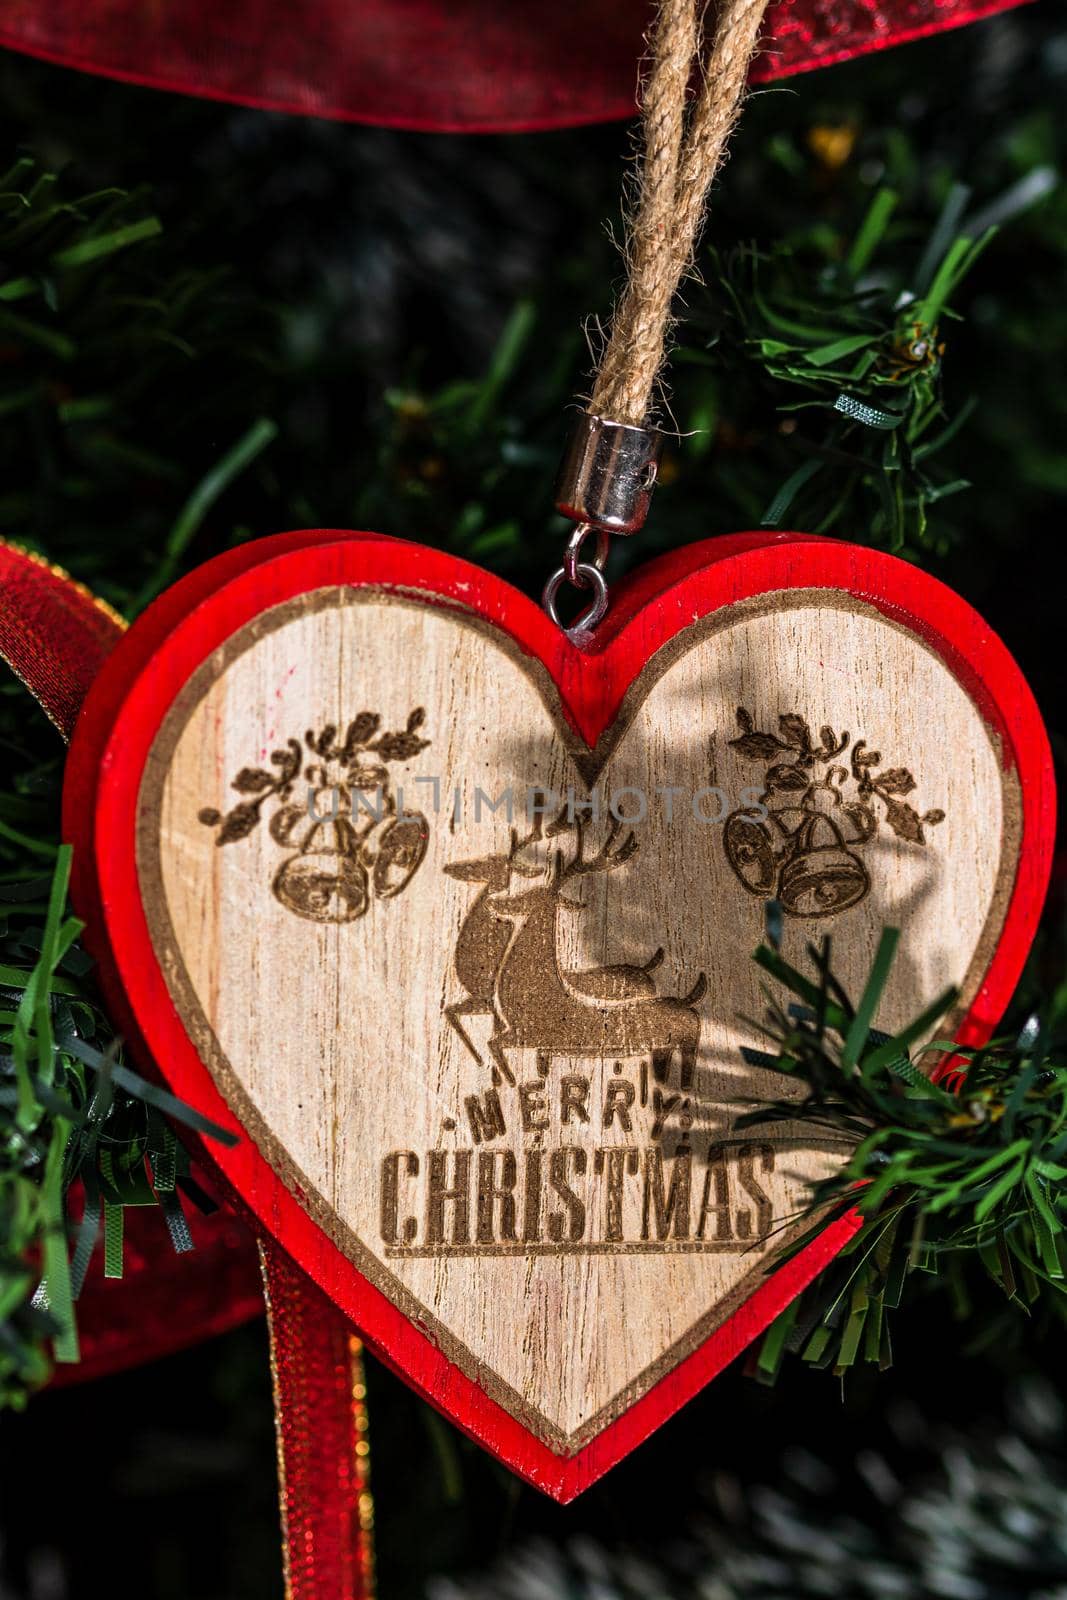 Heart Christmas ornament hanging in the Christmas tree